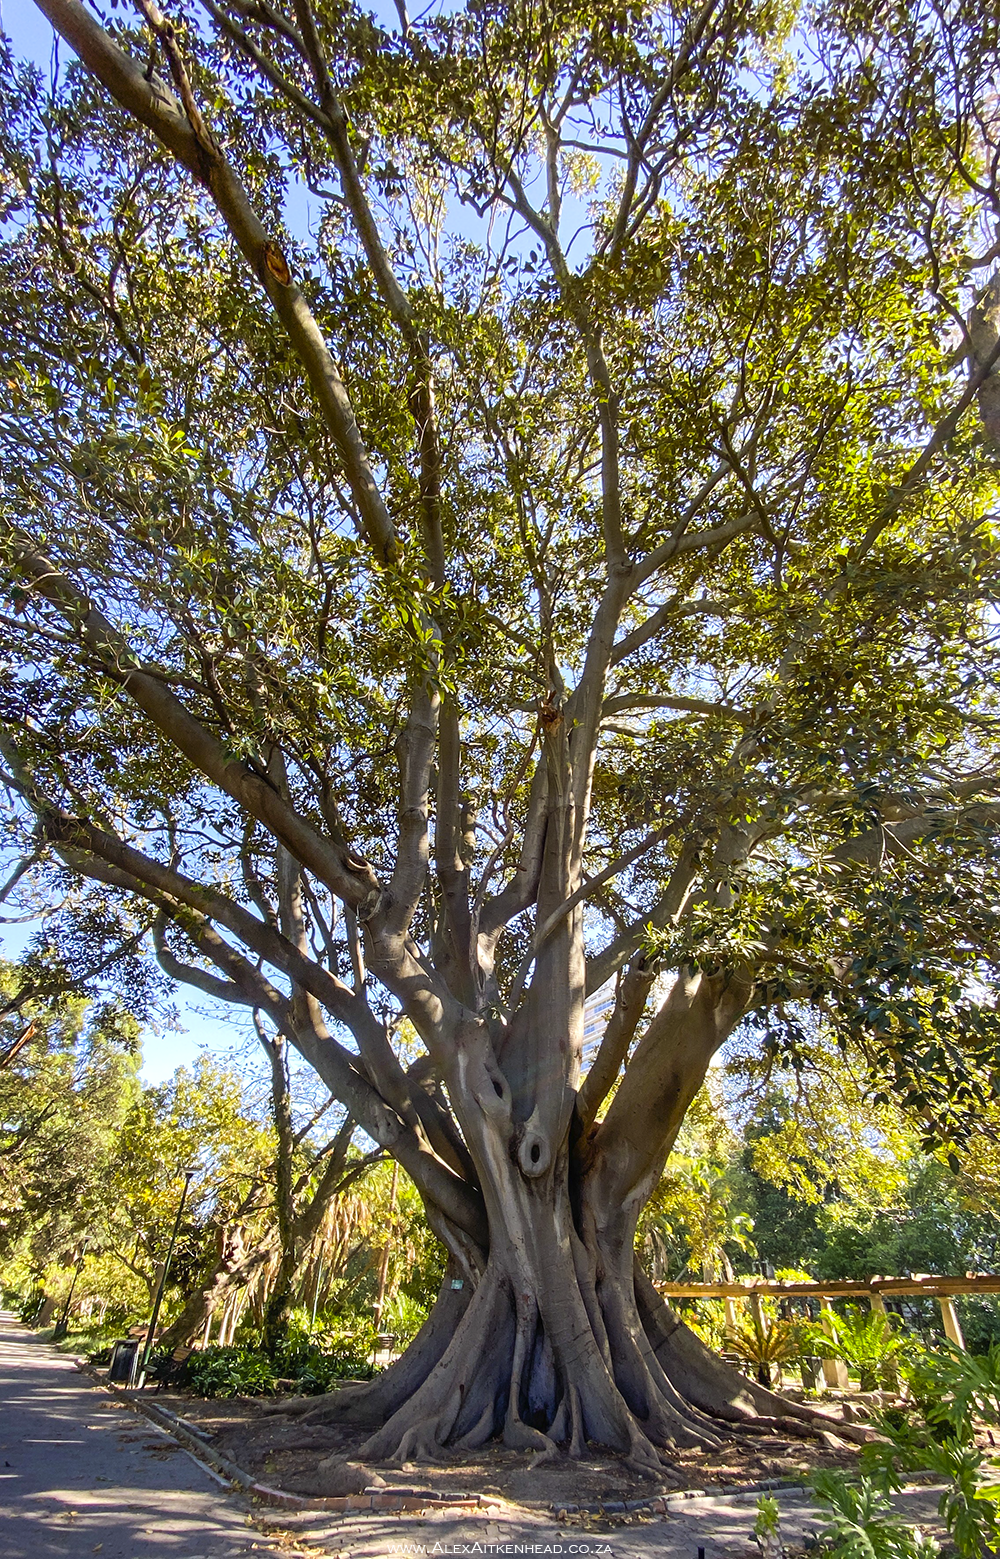 Champion Tree, Champion Trees of South Africa, Rubber Tree, Ficus elastica Moraceae, Alex and Juanita Aitkenhead, African Photography, Cape Town, Companys Garden, Video of Champion Tree